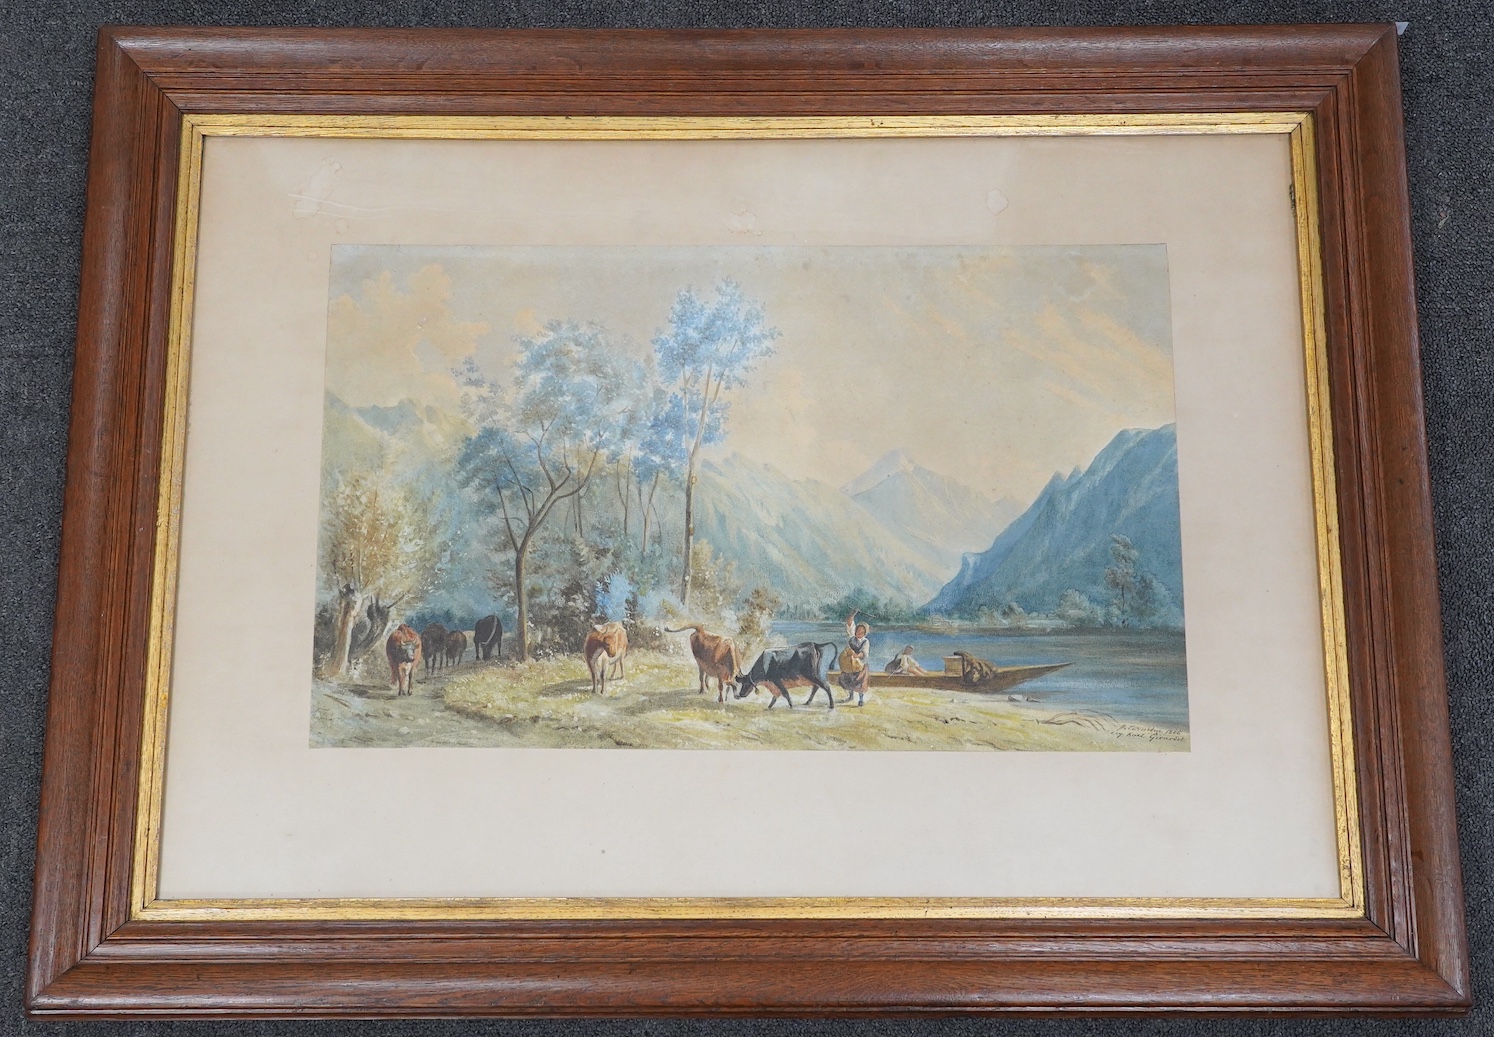 Karl Girardet (1813-1871), watercolour, Swiss mountainous landscape, signed and dated 1866, 34 x 56cm. Condition - fair, discolouration to the paper throughout